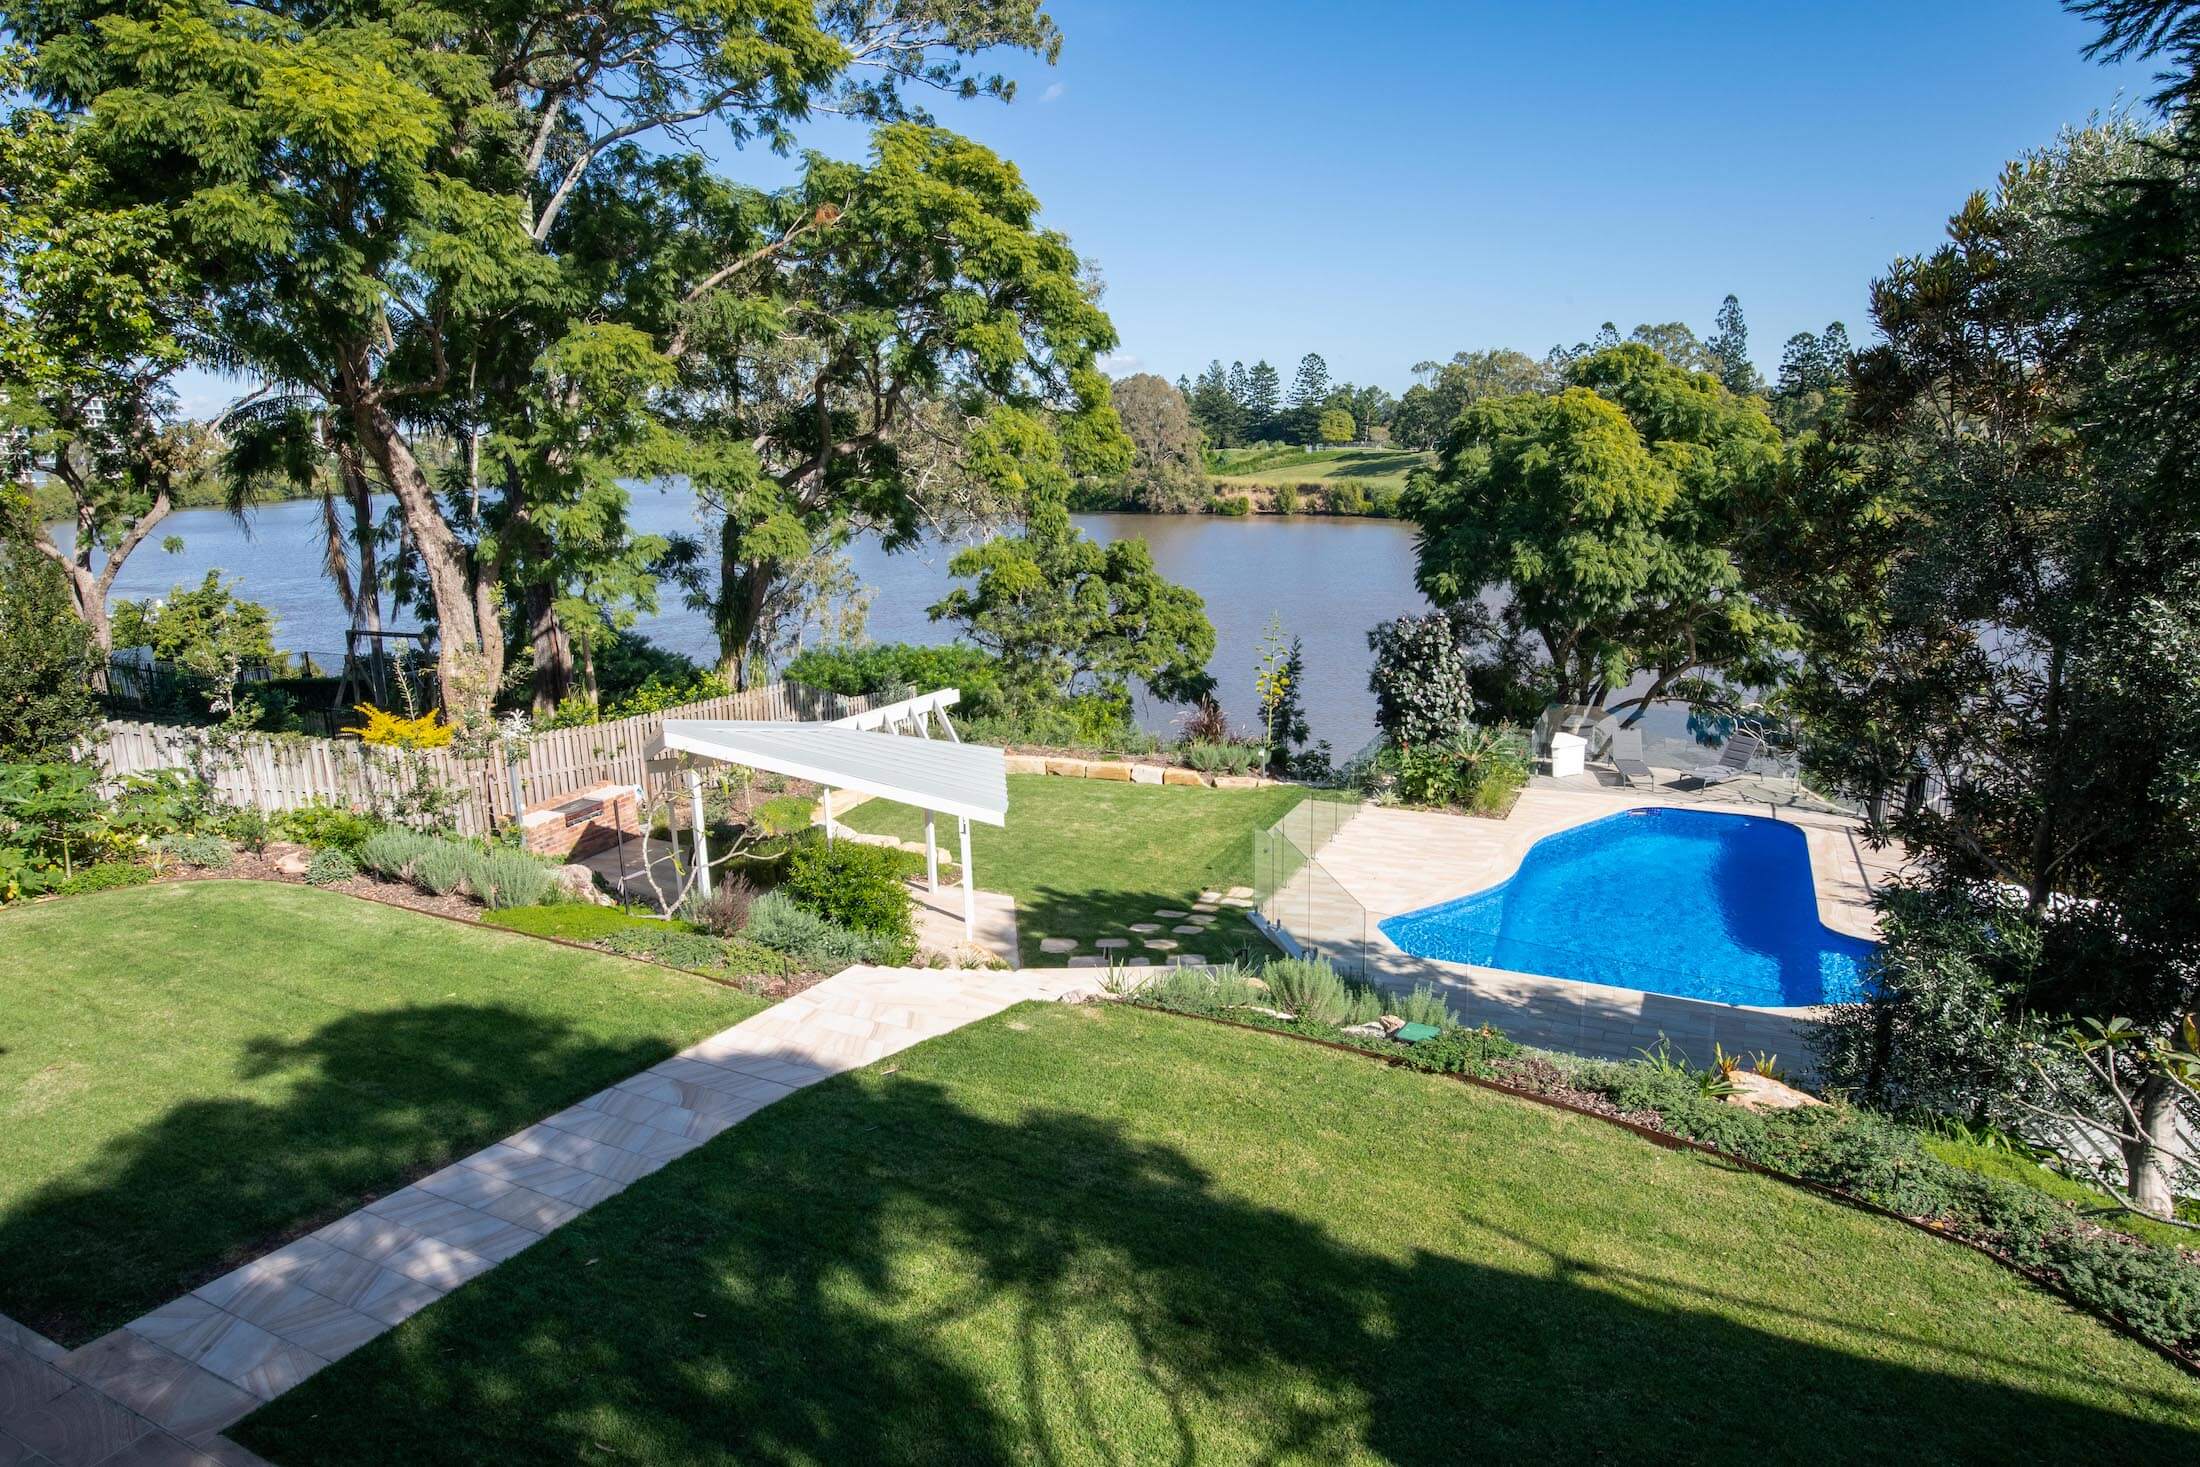 Views across Brisbane River and landscaped yard with pool and pergola